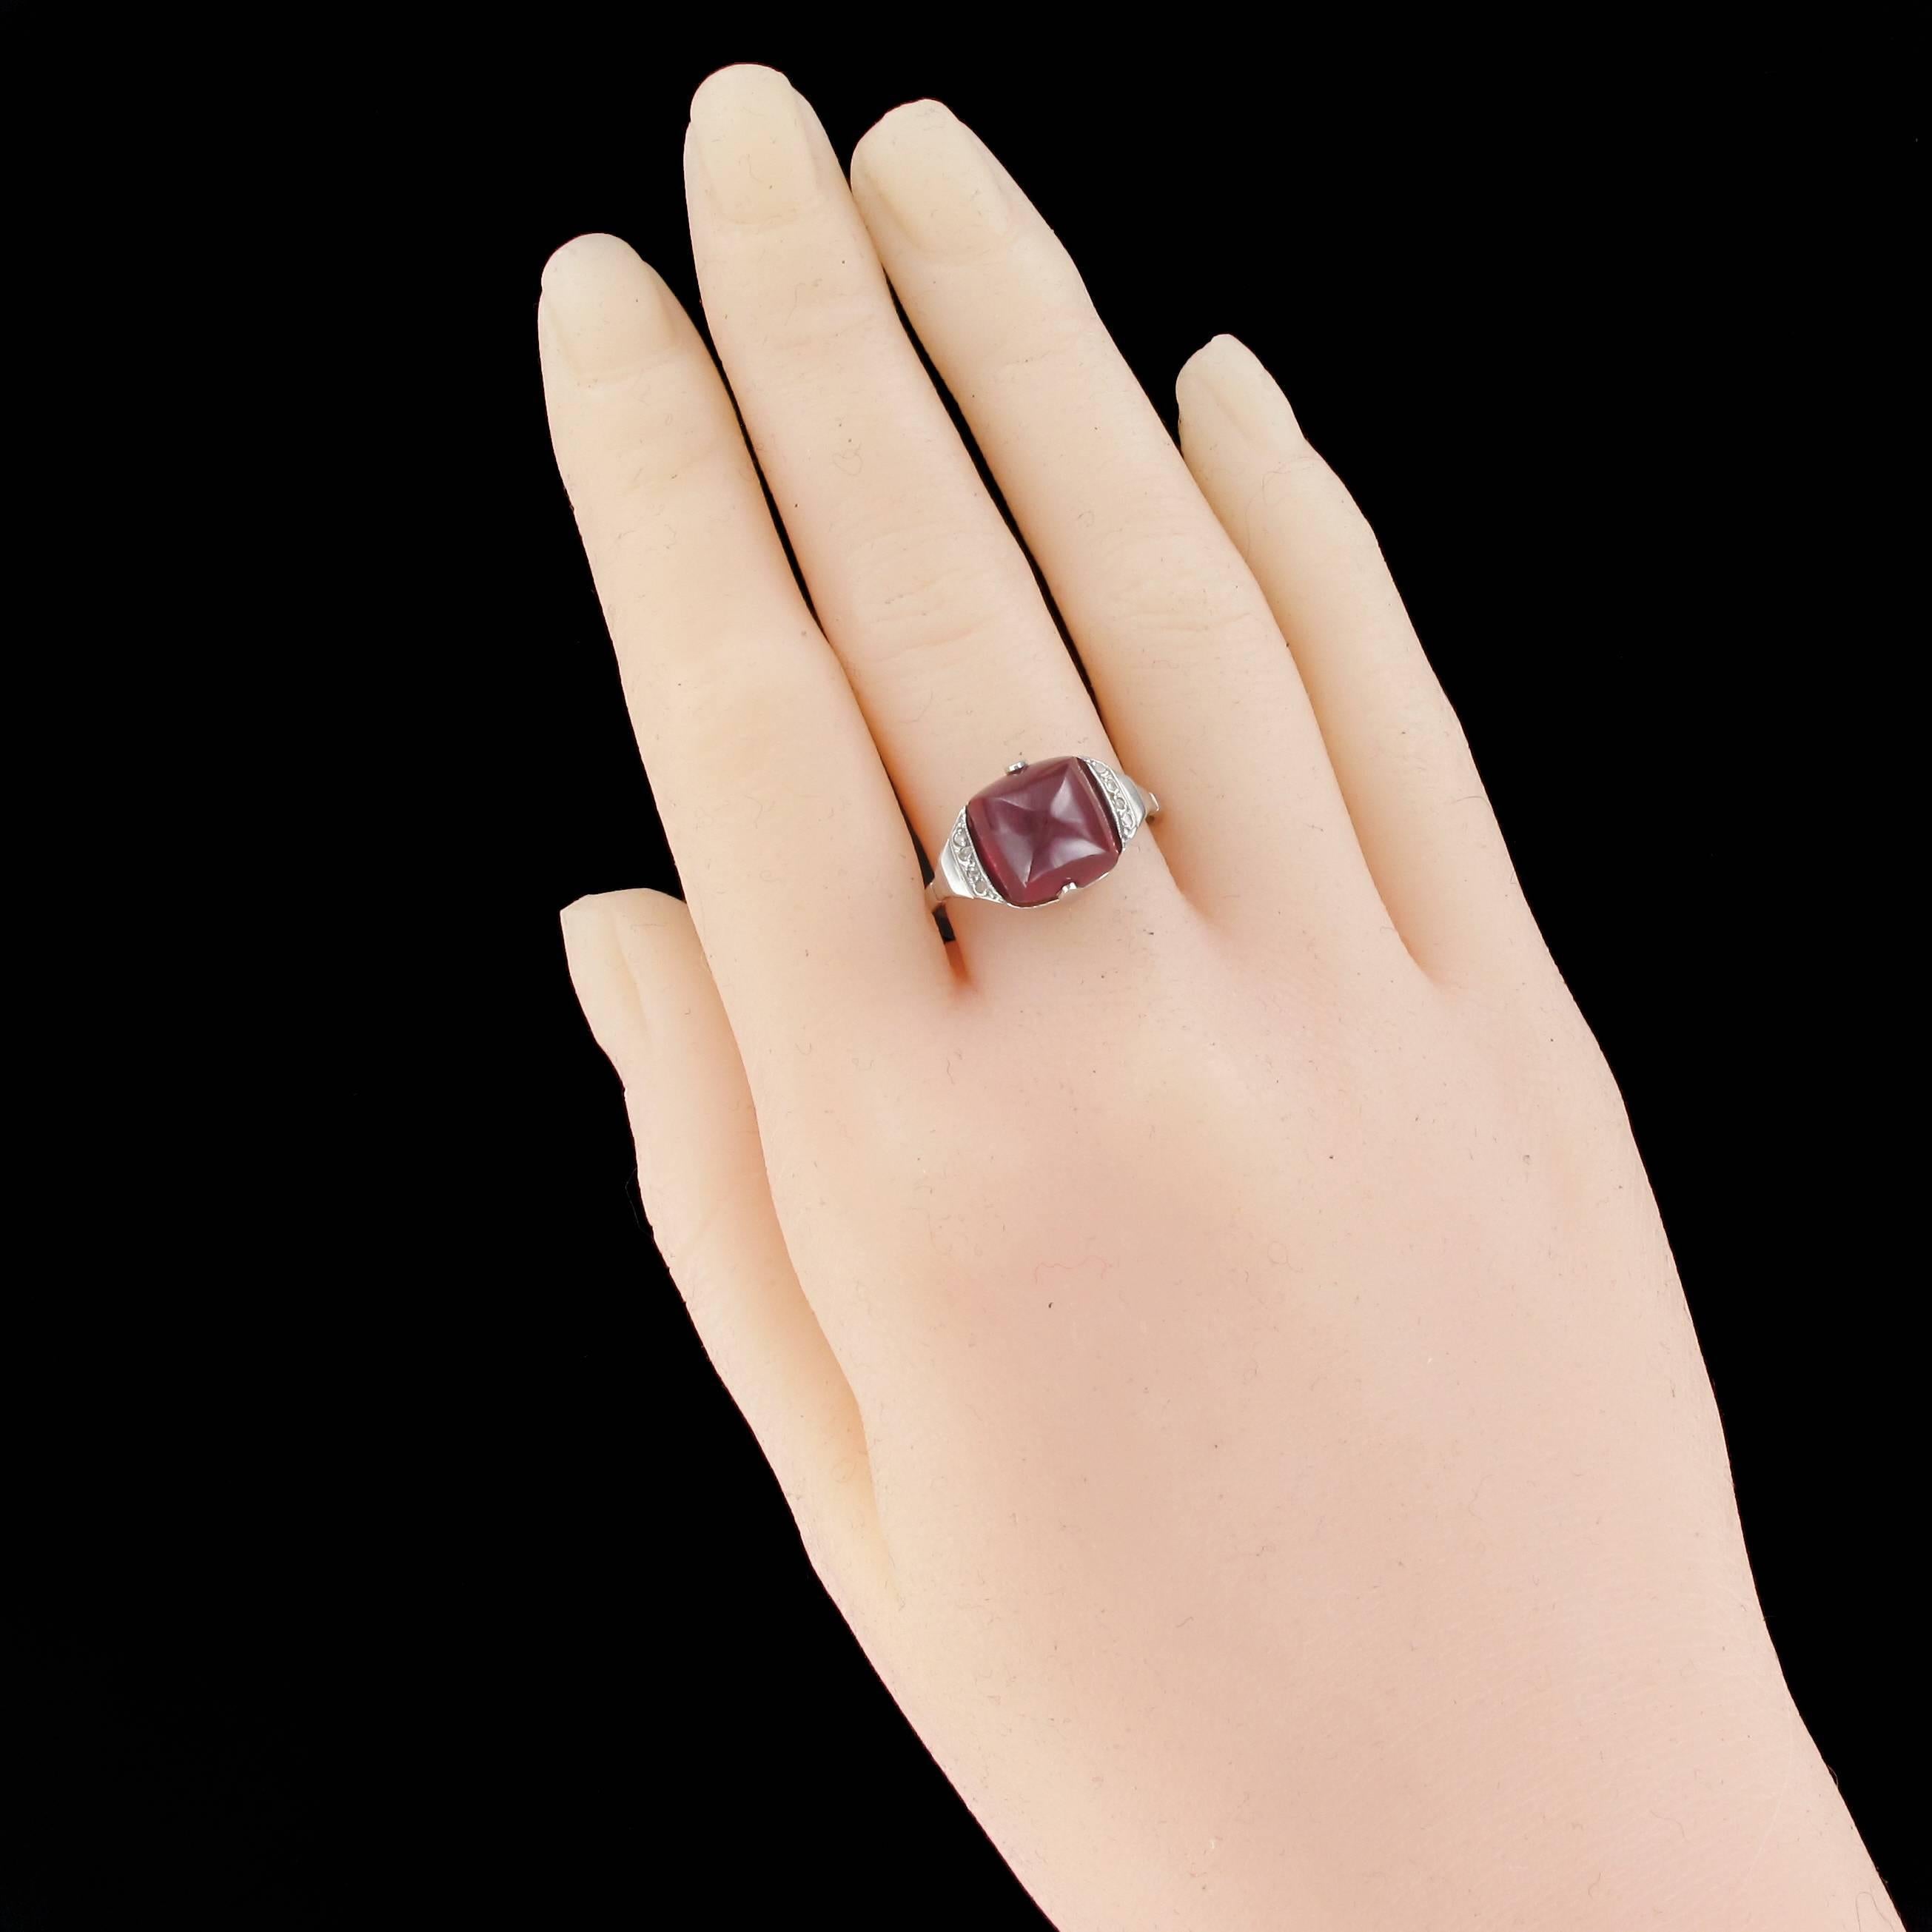 Ring in 18 carat white gold, eagle head hallmark.

This splendid antique ring is set with a sugar loaf shaped ruby cabochon. At each side is a line of 4 rose cut diamonds. The beginning of the ring band on each side has a chiselled geometric design.